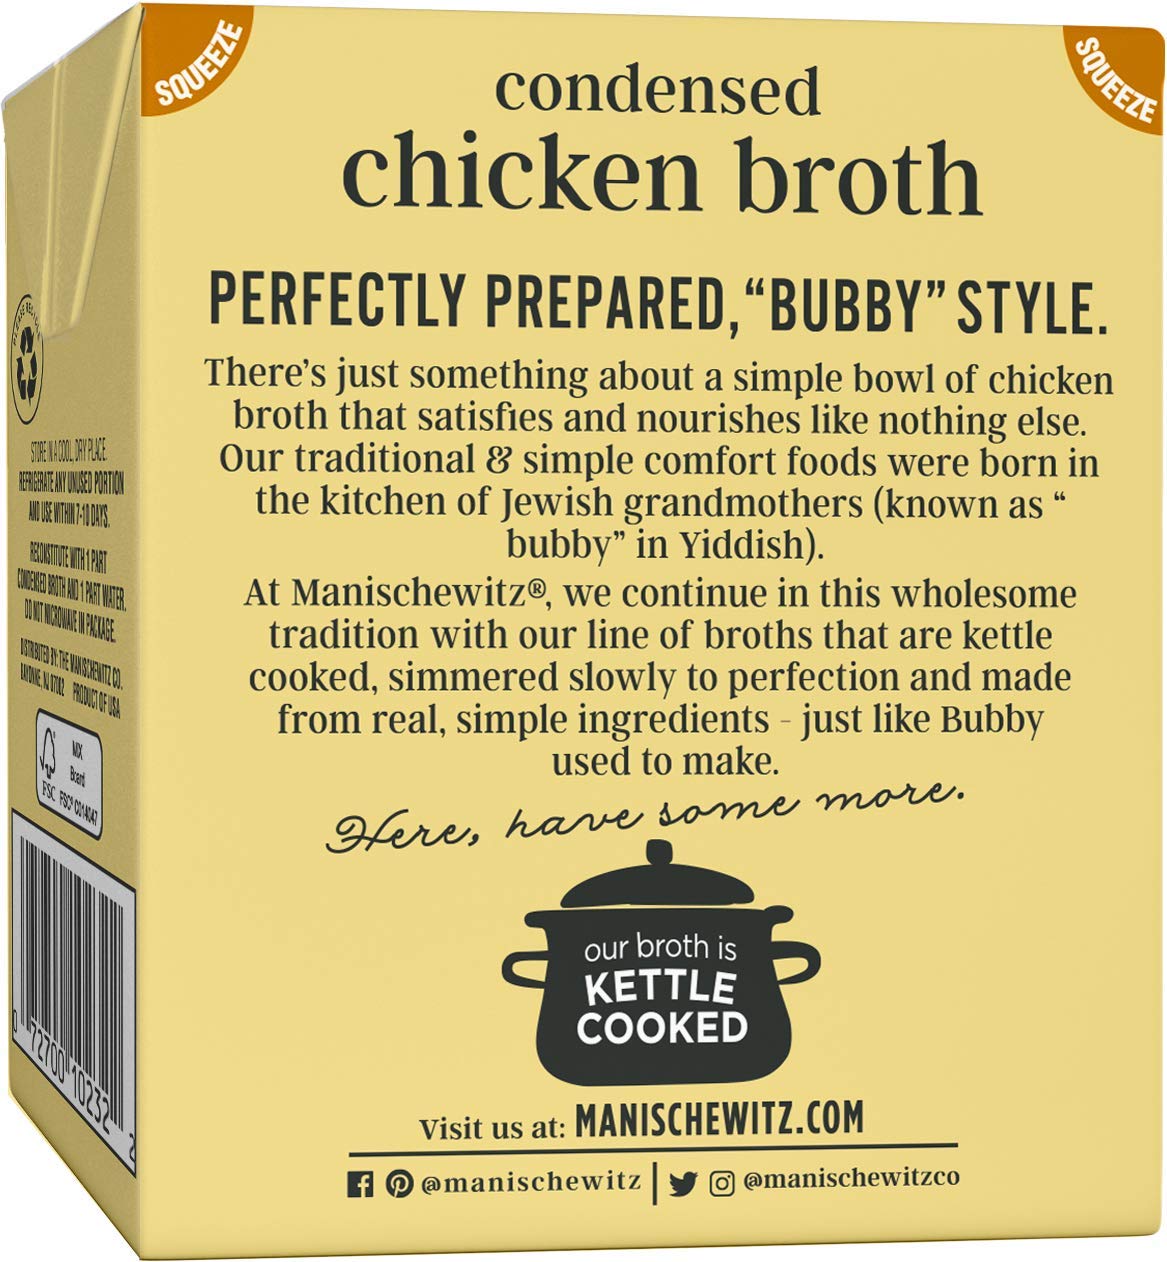 Manischewitz Condensed Chicken Broth 12oz (6 Pack), Flavorful, Kettle Cooked, Slowly Simmered : Grocery & Gourmet Food